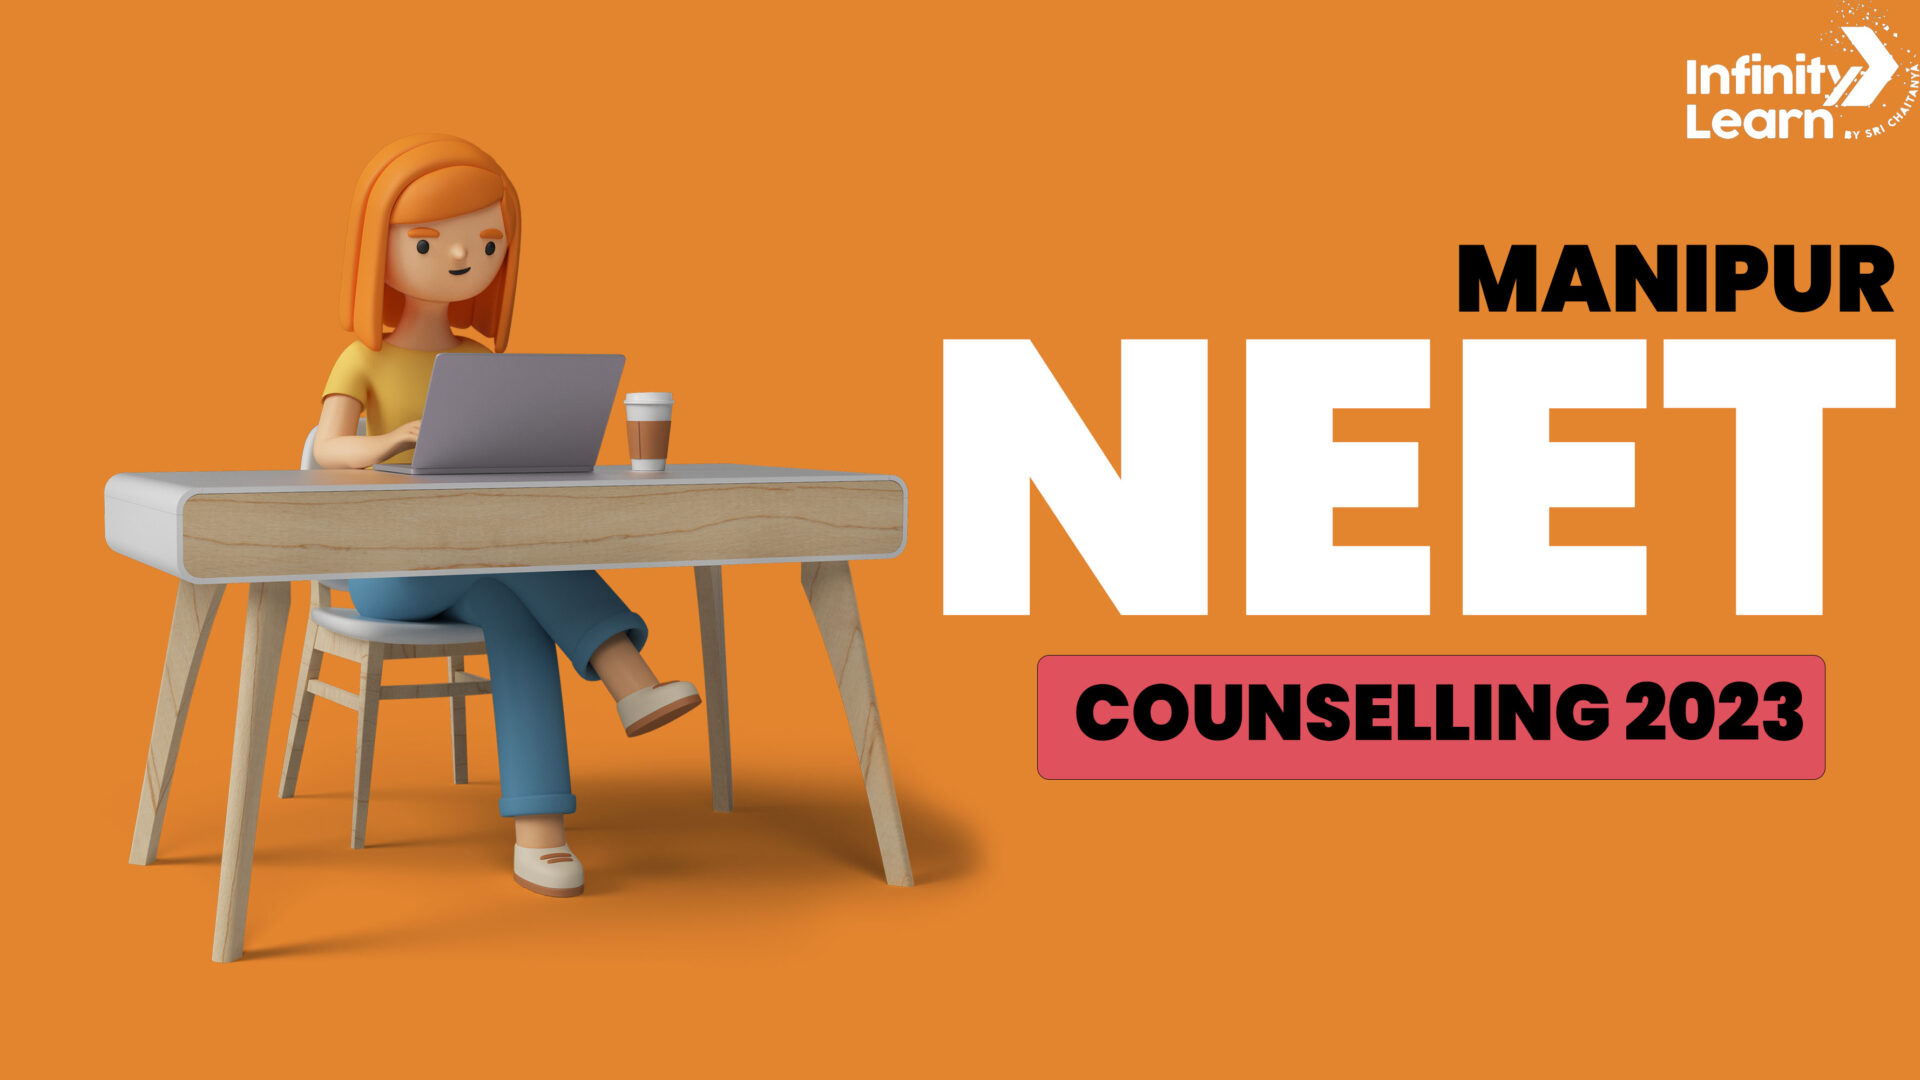 Manipur NEET Counselling 2023